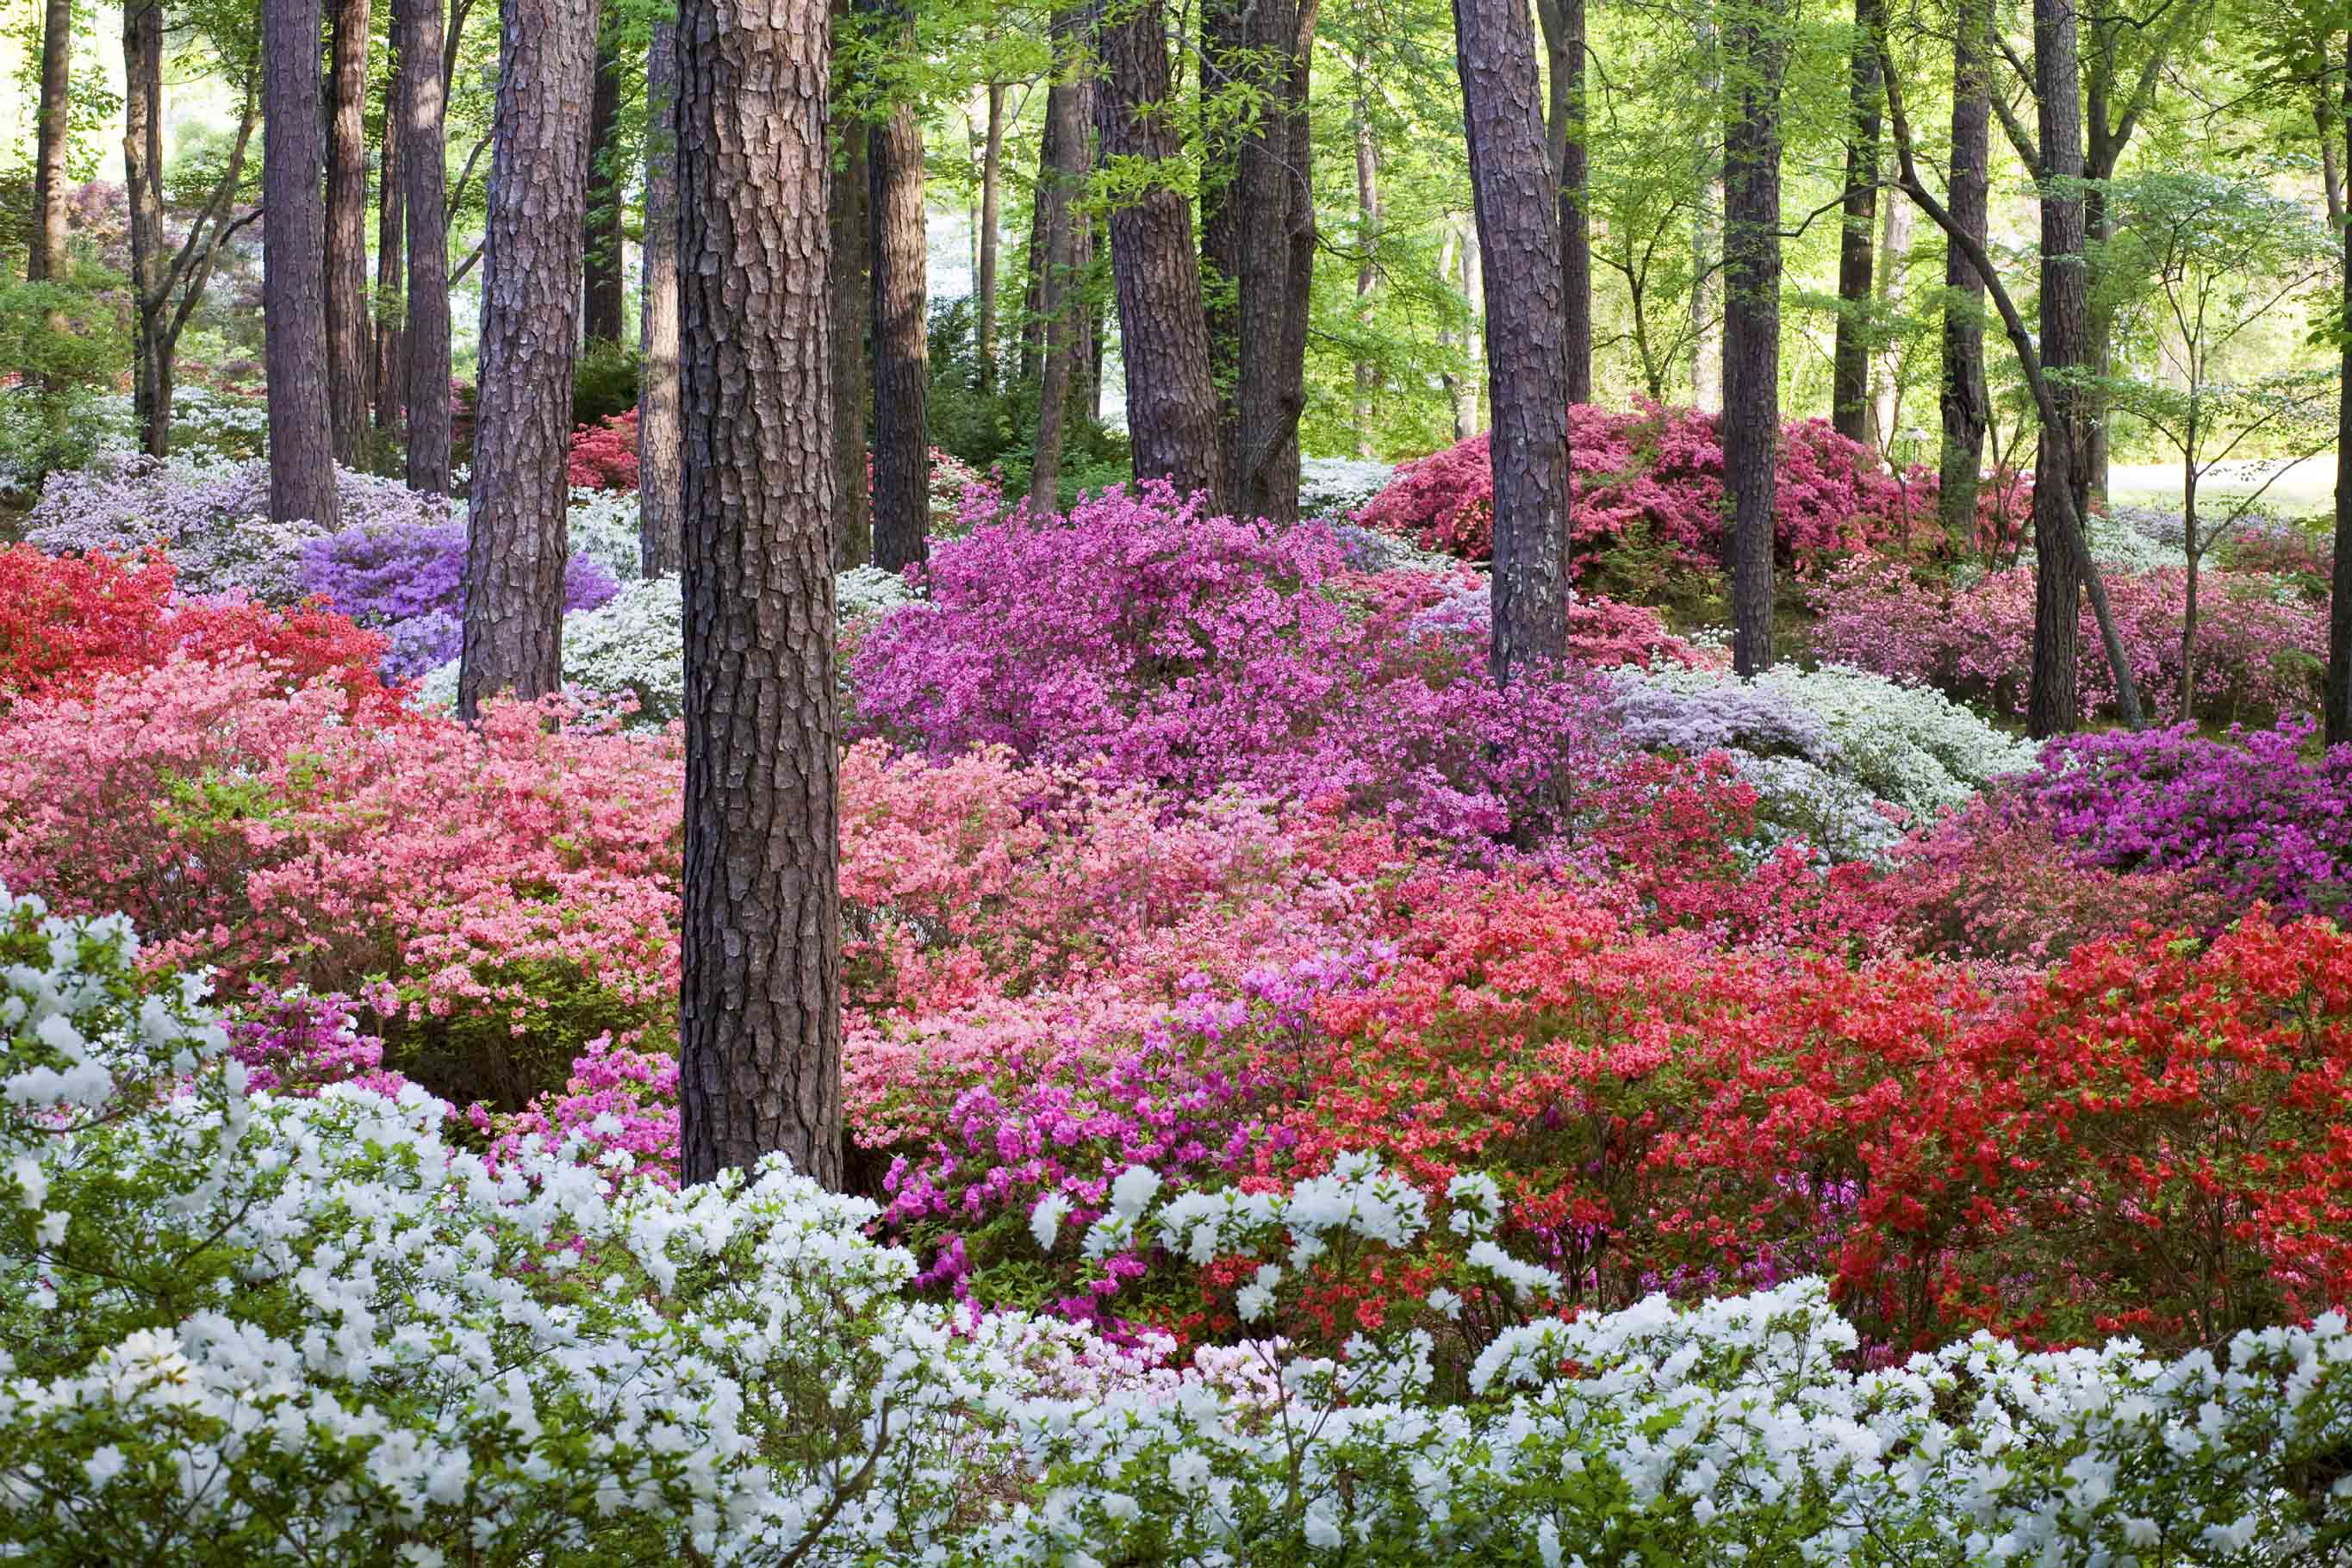 Blooming of the World-Famous Azaleas Has Arrived at Callaway Gardens